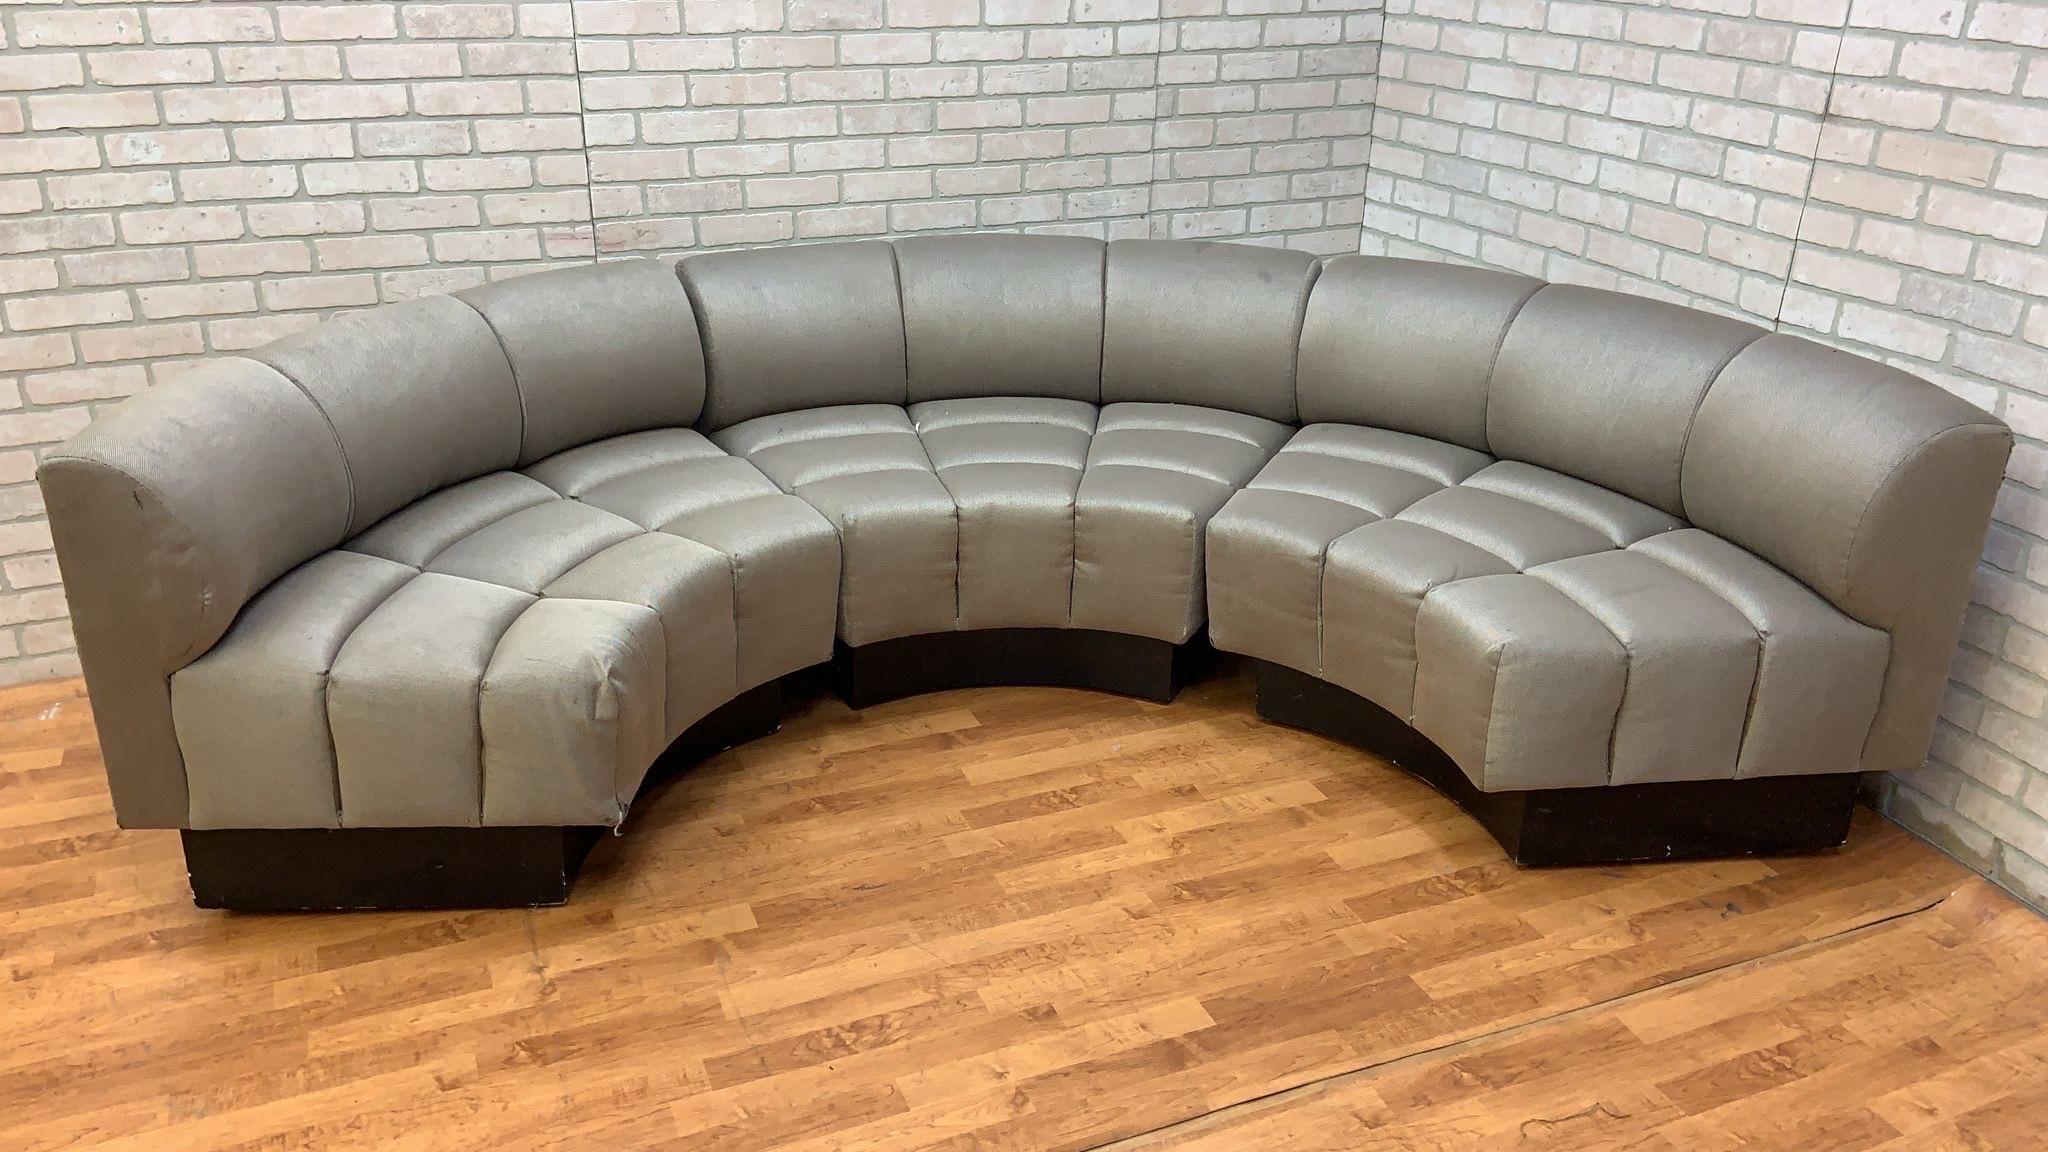 Mid-20th Century Vintage Custom Channel Back Modular Wedge Circular Sectional Lounge Sofa For Sale